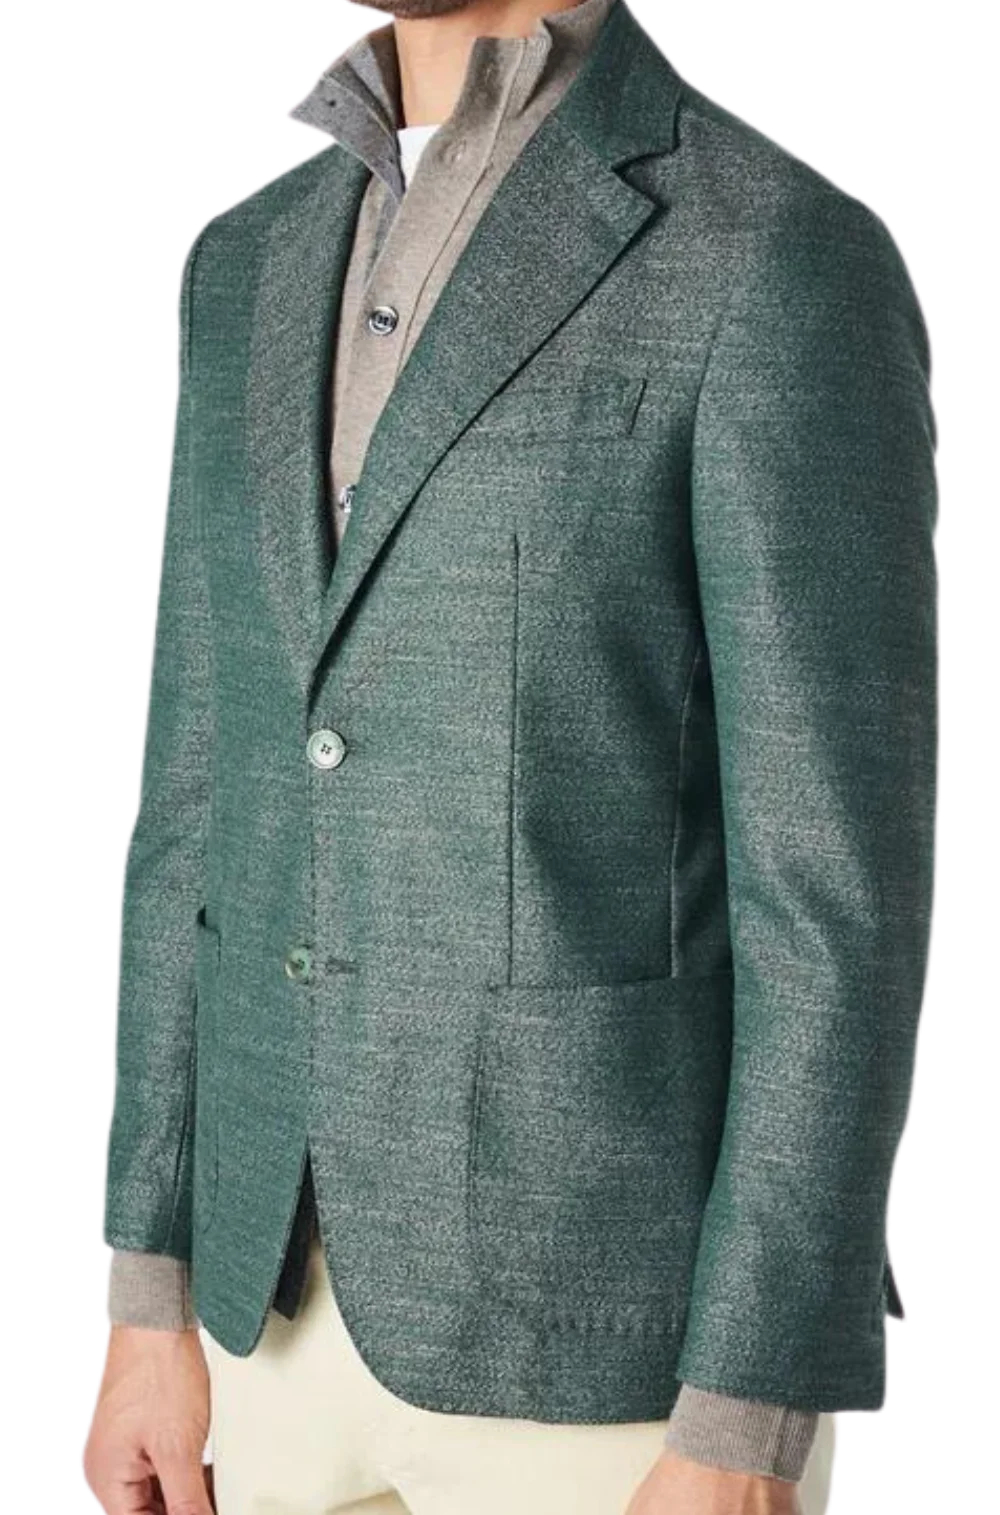 Men's Fusaro Austine Melange Wool Blend Jacket in Green (21089) - available in-store, 337 Monty Naicker Street, Durban CBD or online at Omar's Tailors & Outfitters online store.   A men's fashion curation for South African men - established in 1911.